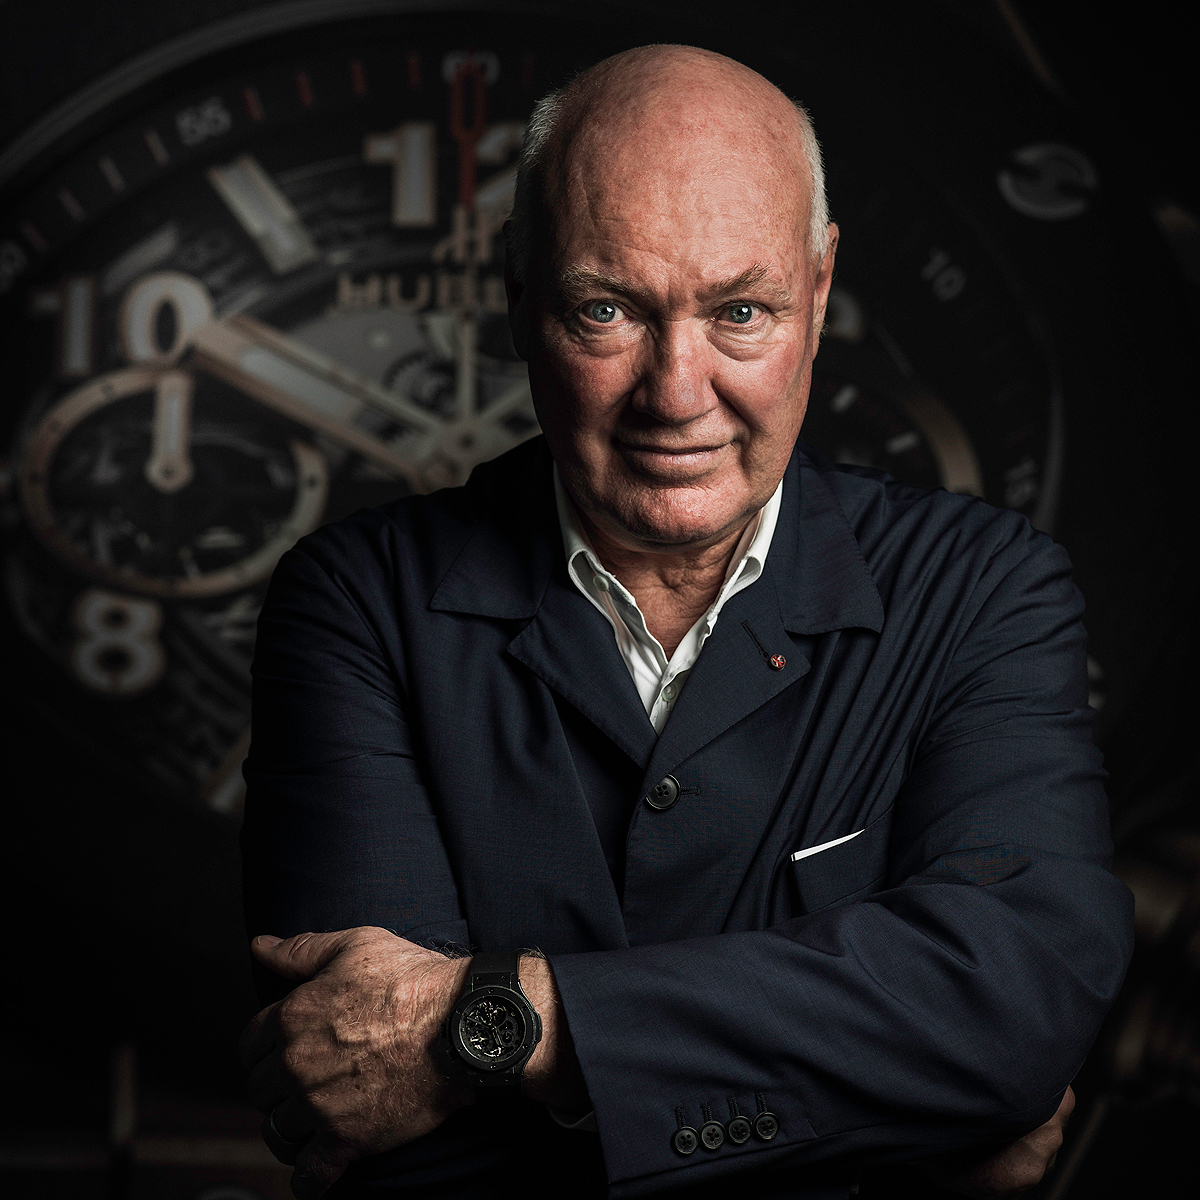 Interview With Jean-Claude Biver On TAG Heuer Watch 9.3% Average Price  Reduction